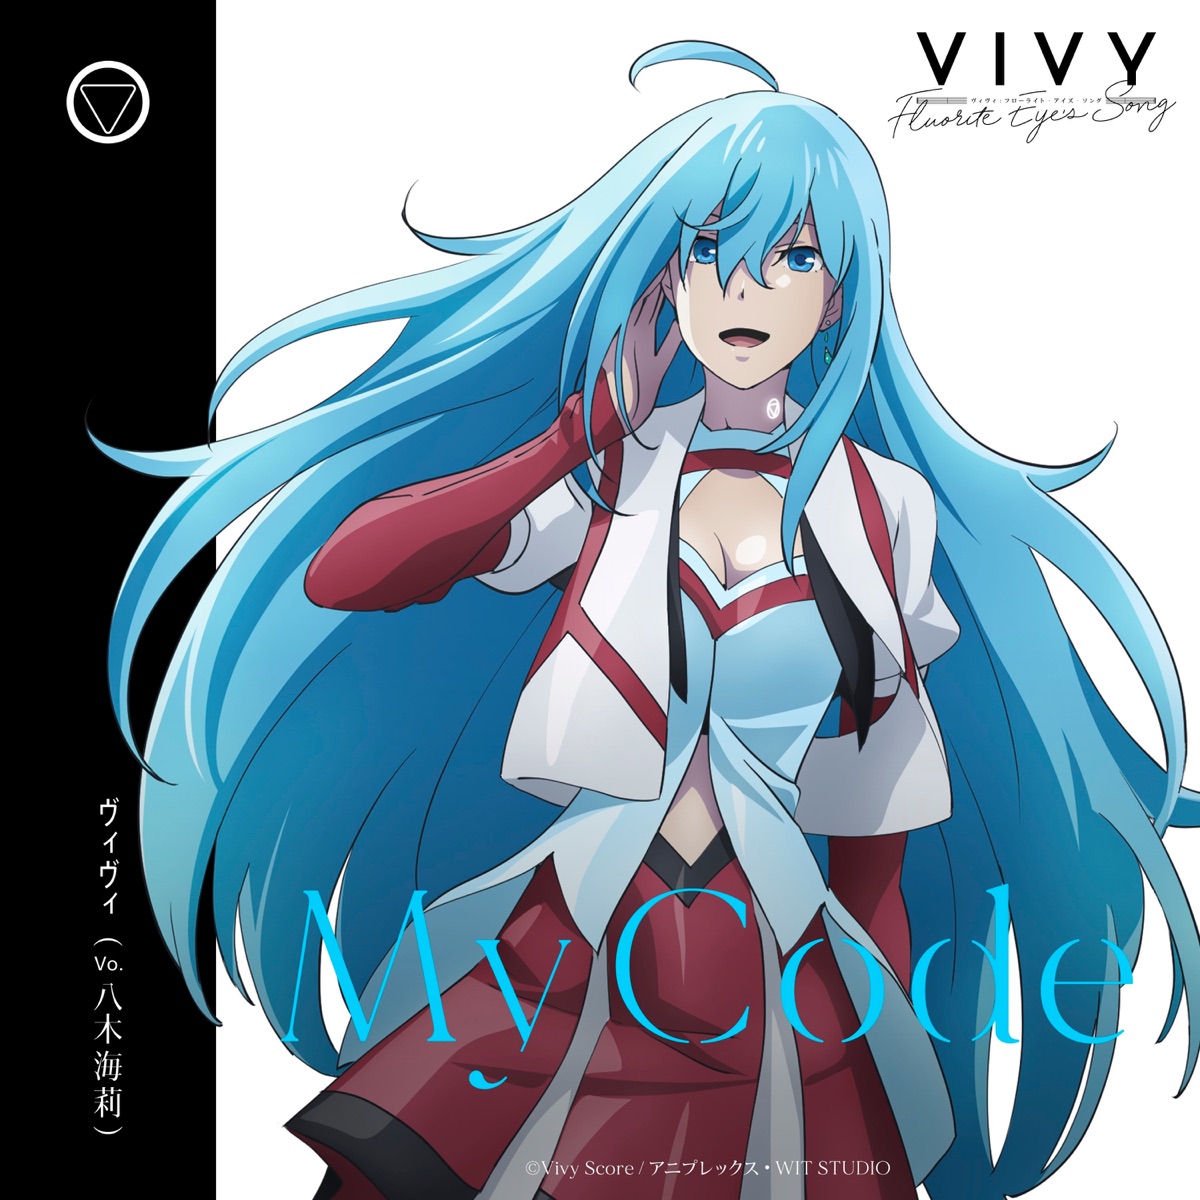 Cover for『Vivy (Kairi Yagi) - My Code』from the release『My Code』